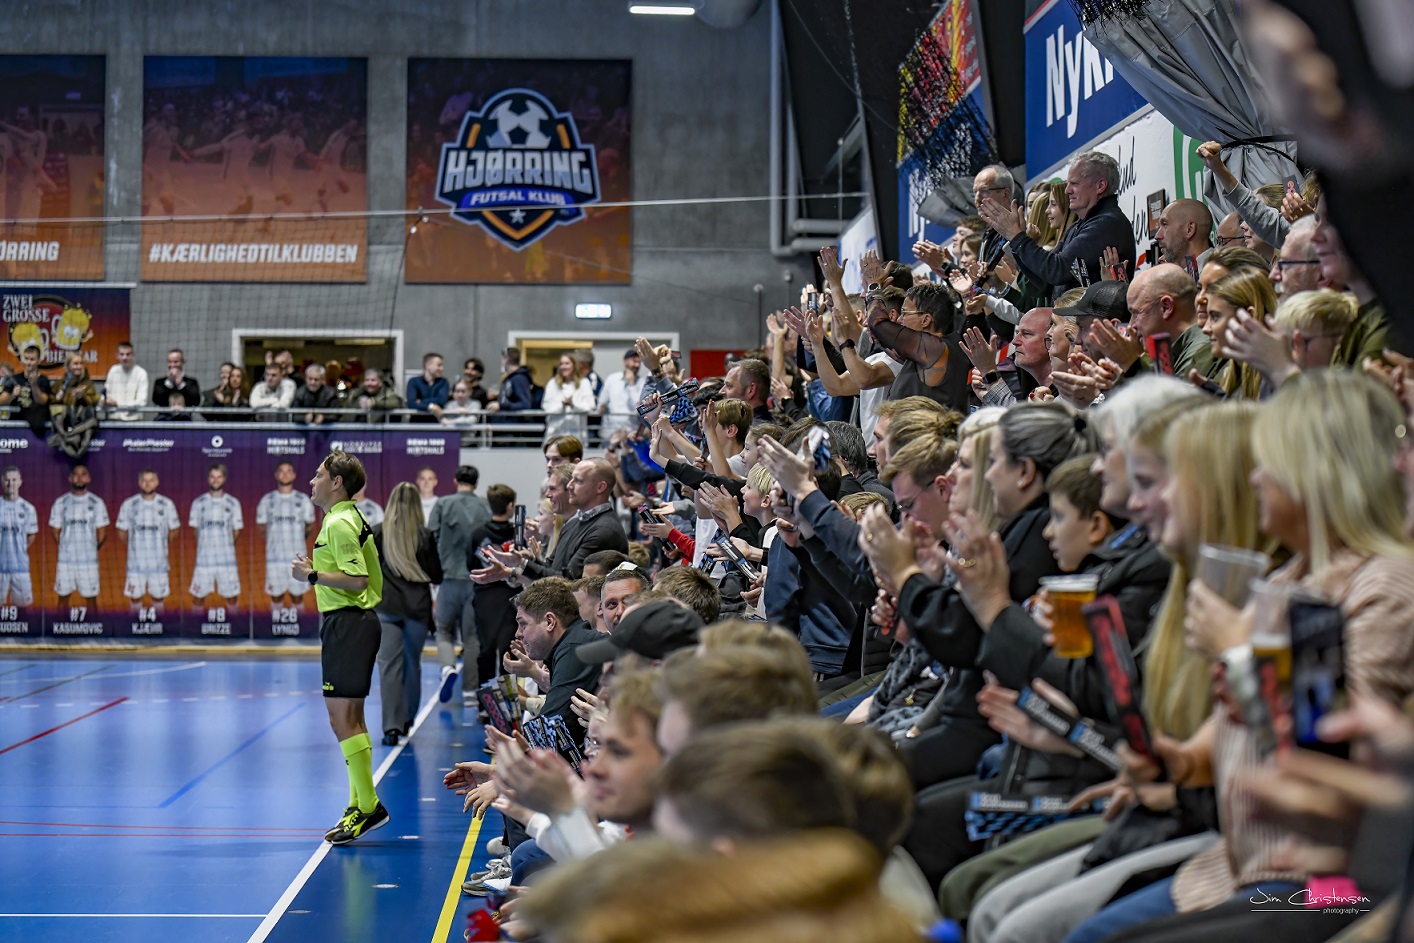 Hjørring Futsal, the perfect example of professional amateurism